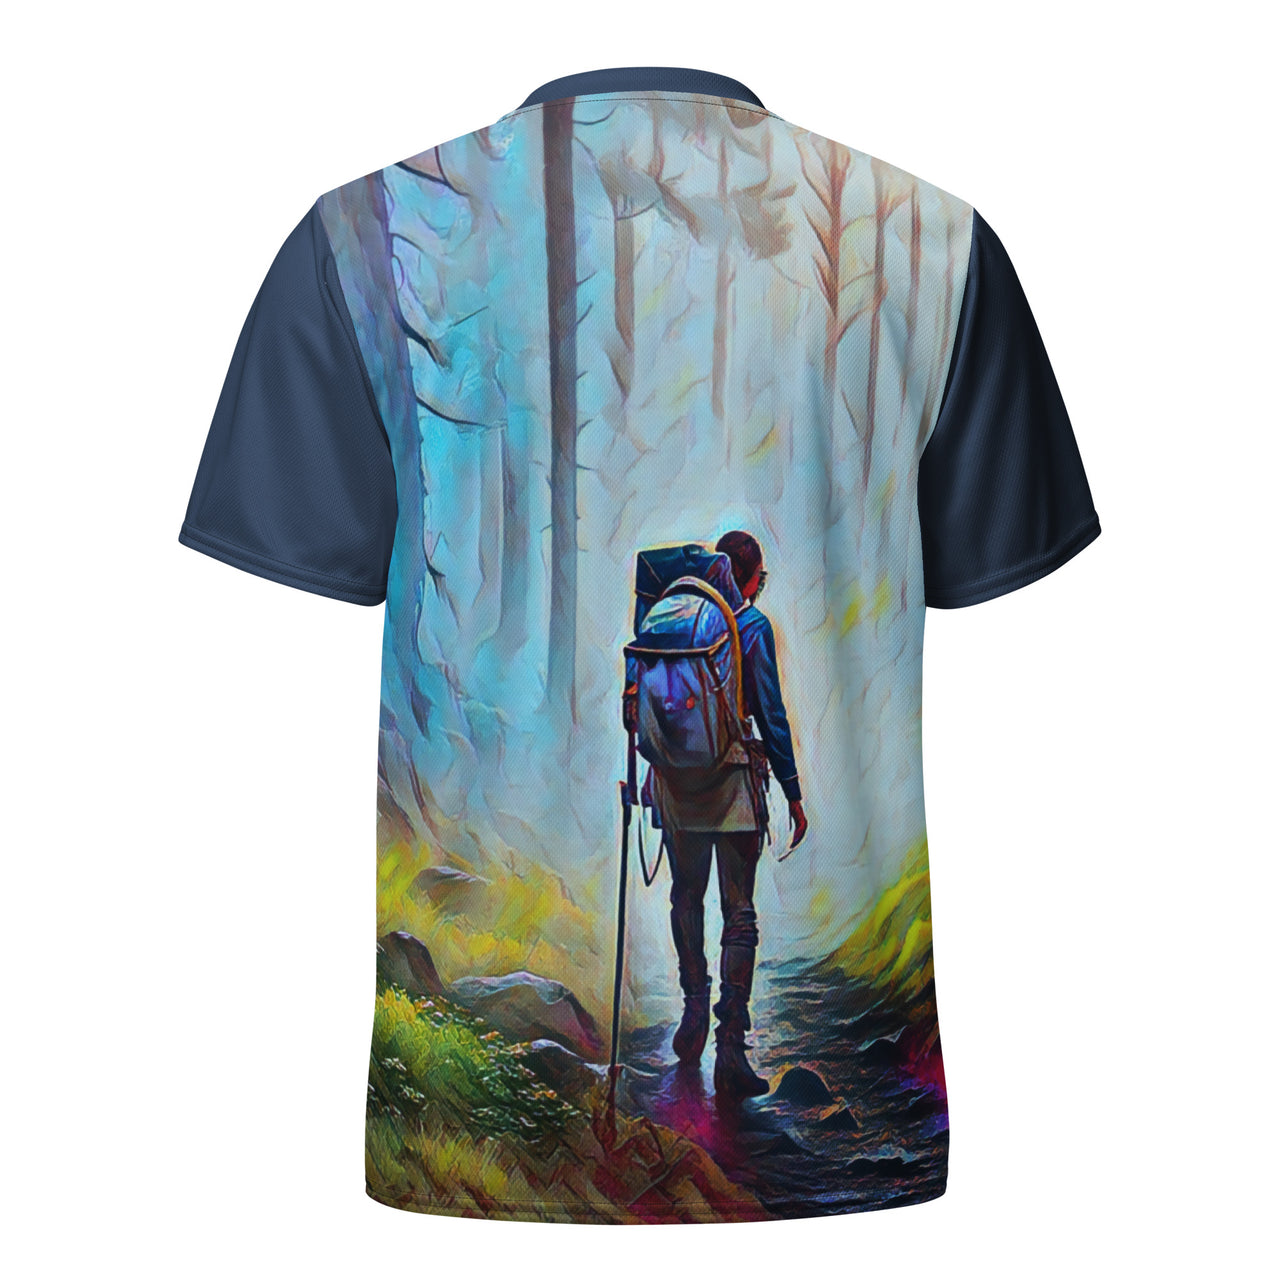 Oregon Hiker - Recycled unisex sports jersey